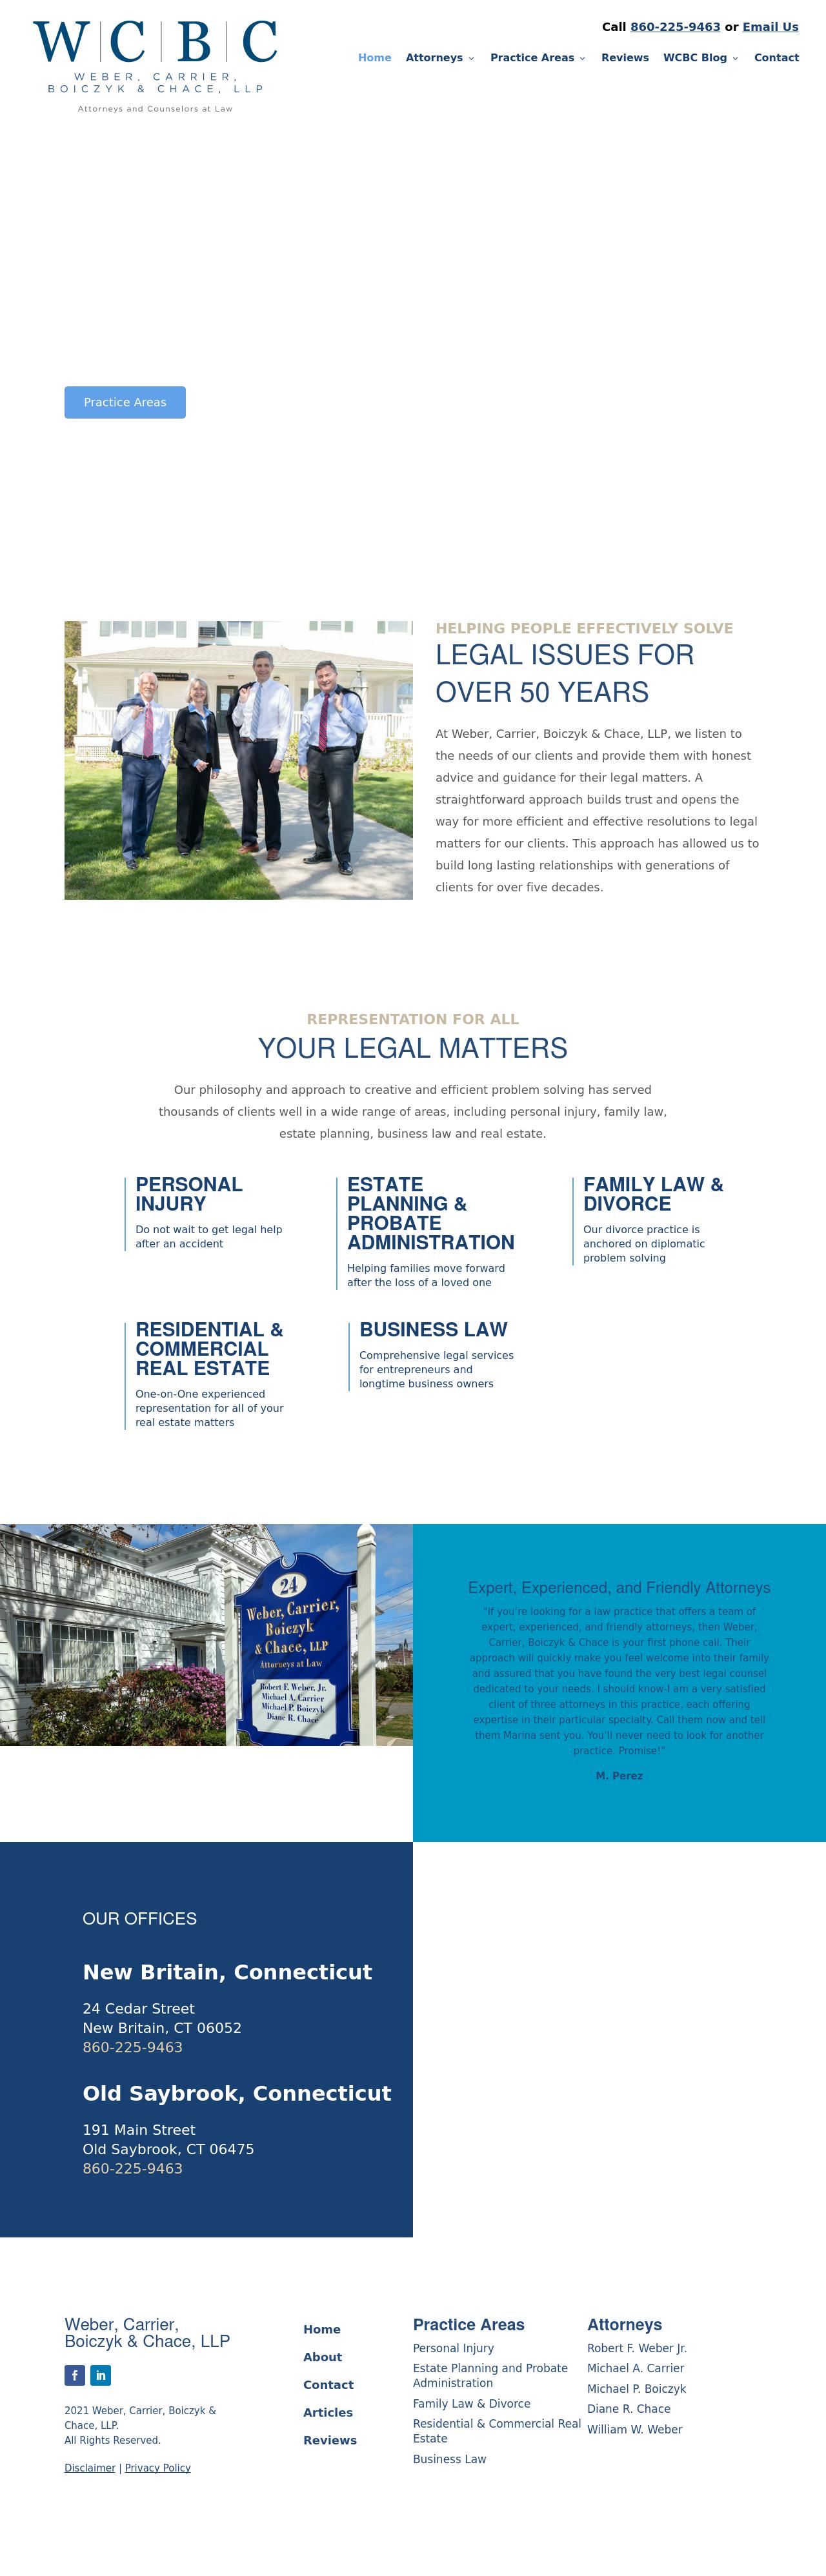 Weber & Carrier, LLP - New Britain CT Lawyers